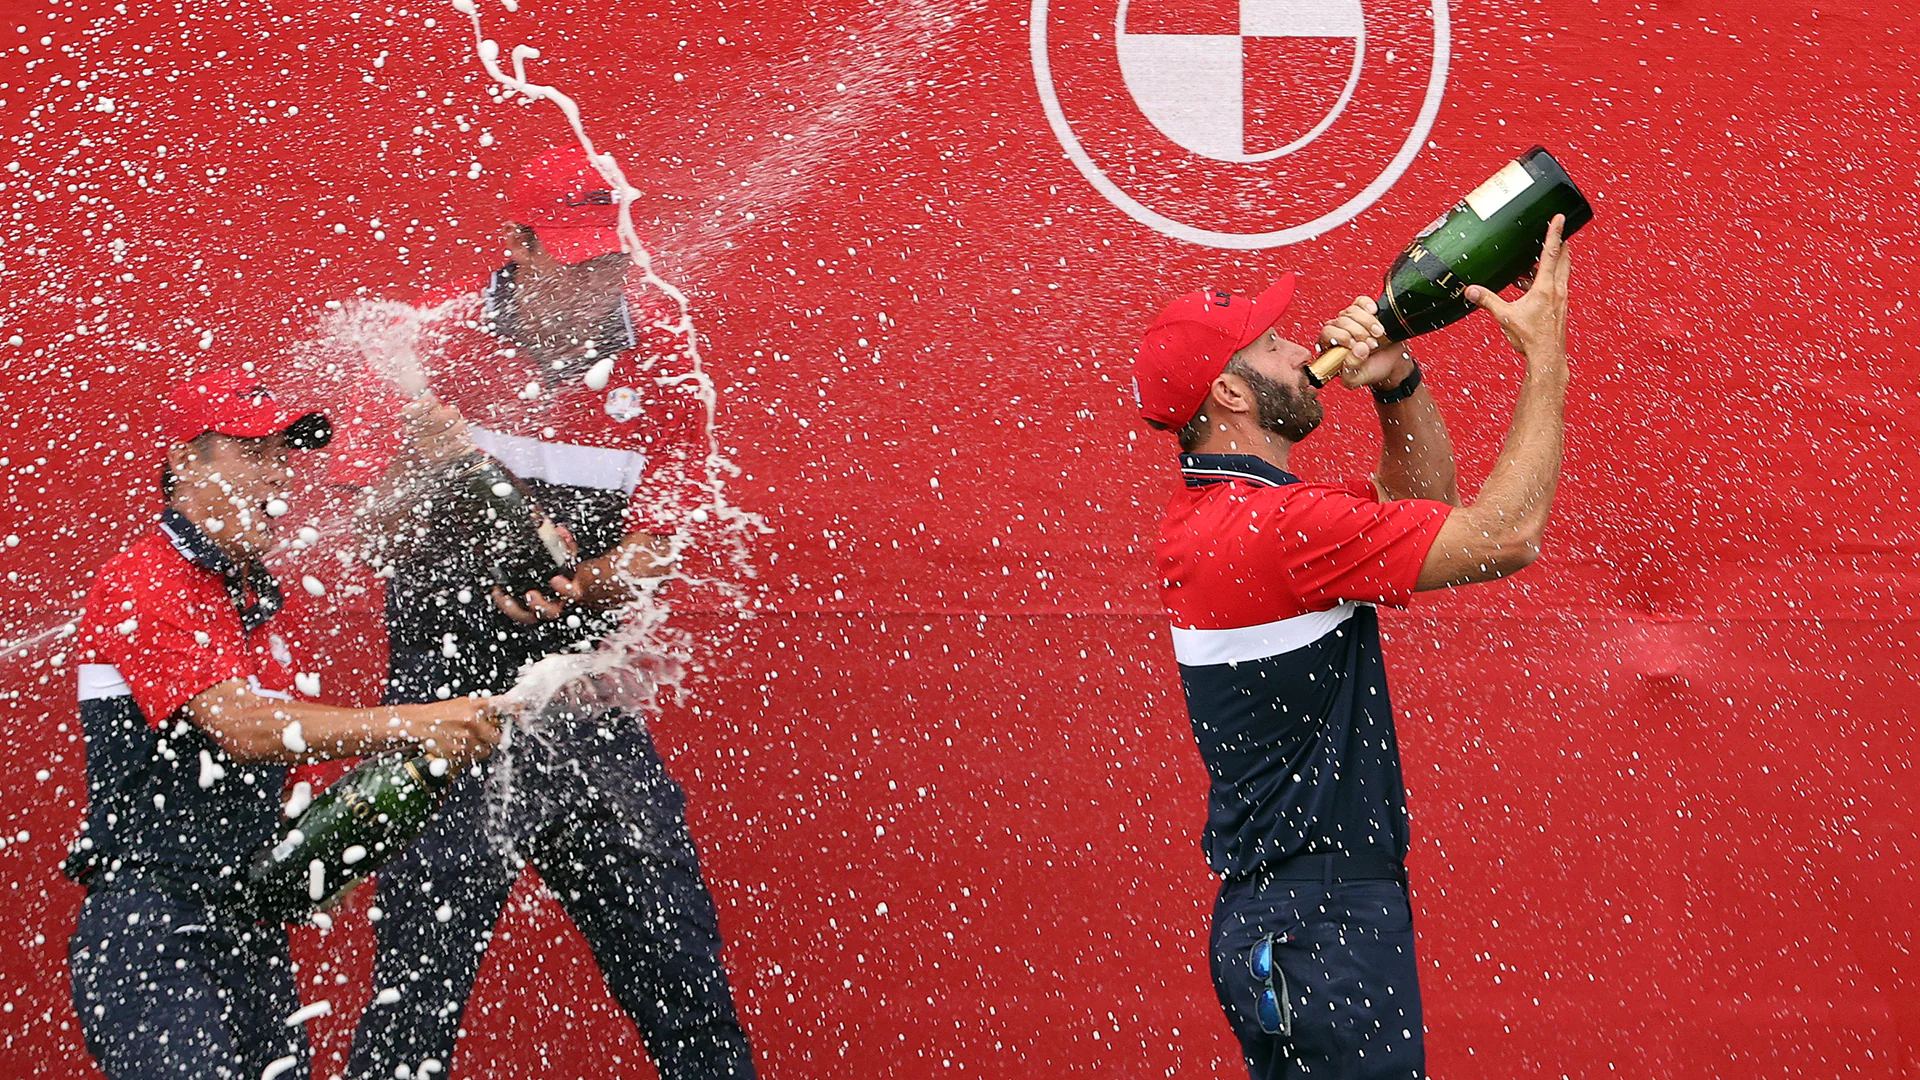 The U.S. won the Ryder Cup, and Dustin Johnson won everything after